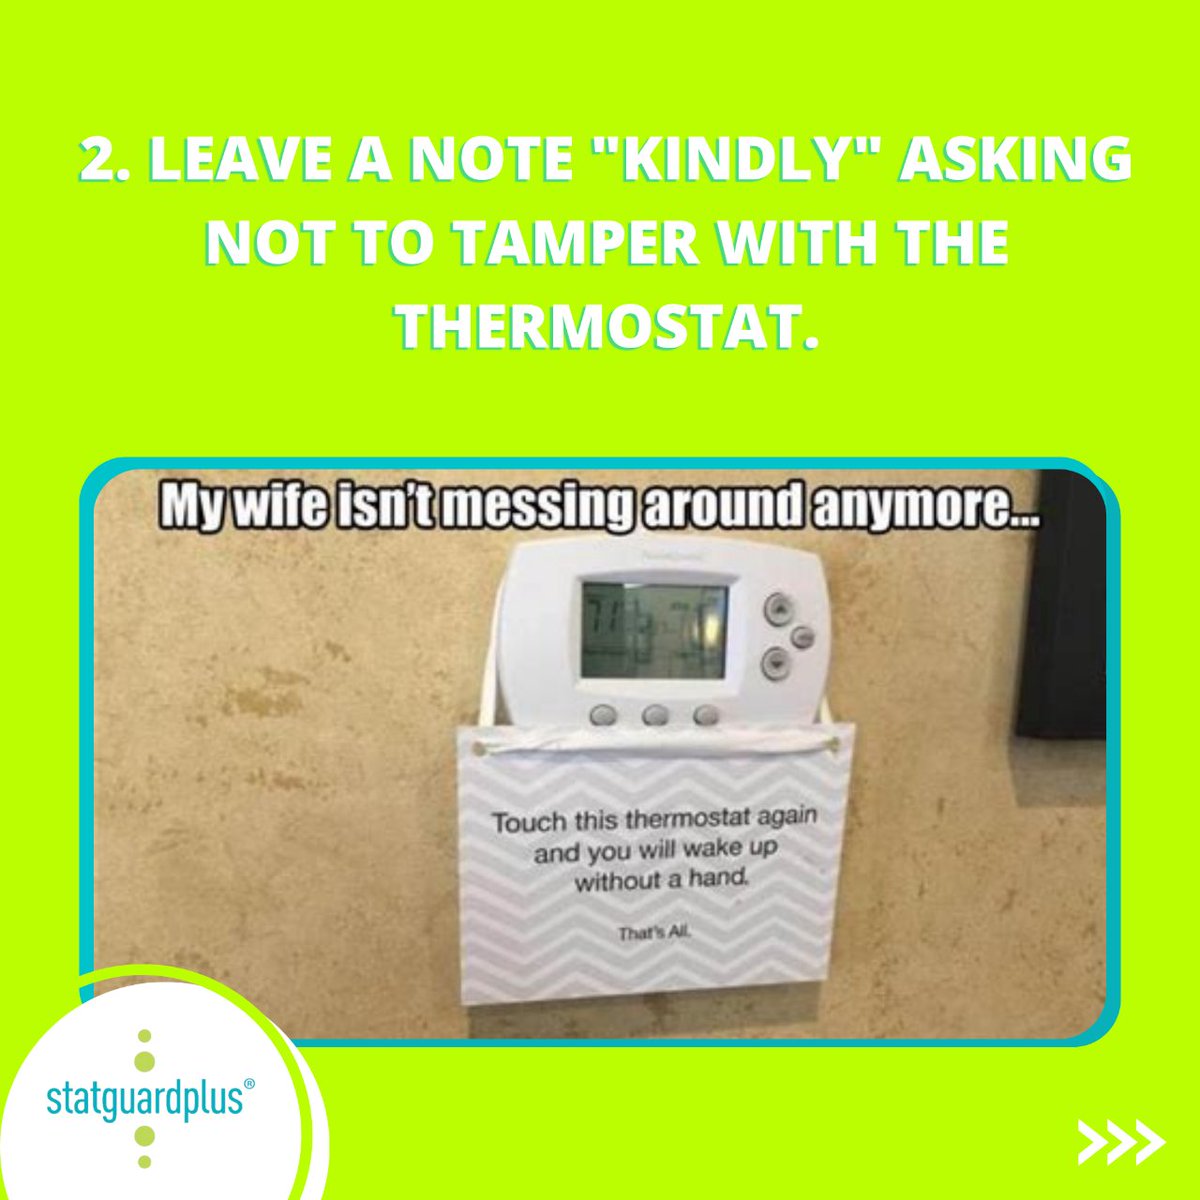 What tricks do you use? Let us know.

#Thermostat #SmallBusiness #RetailStore #ThermostatGuard #Store #Office #SmallBiz #Protect #ThermostatTips